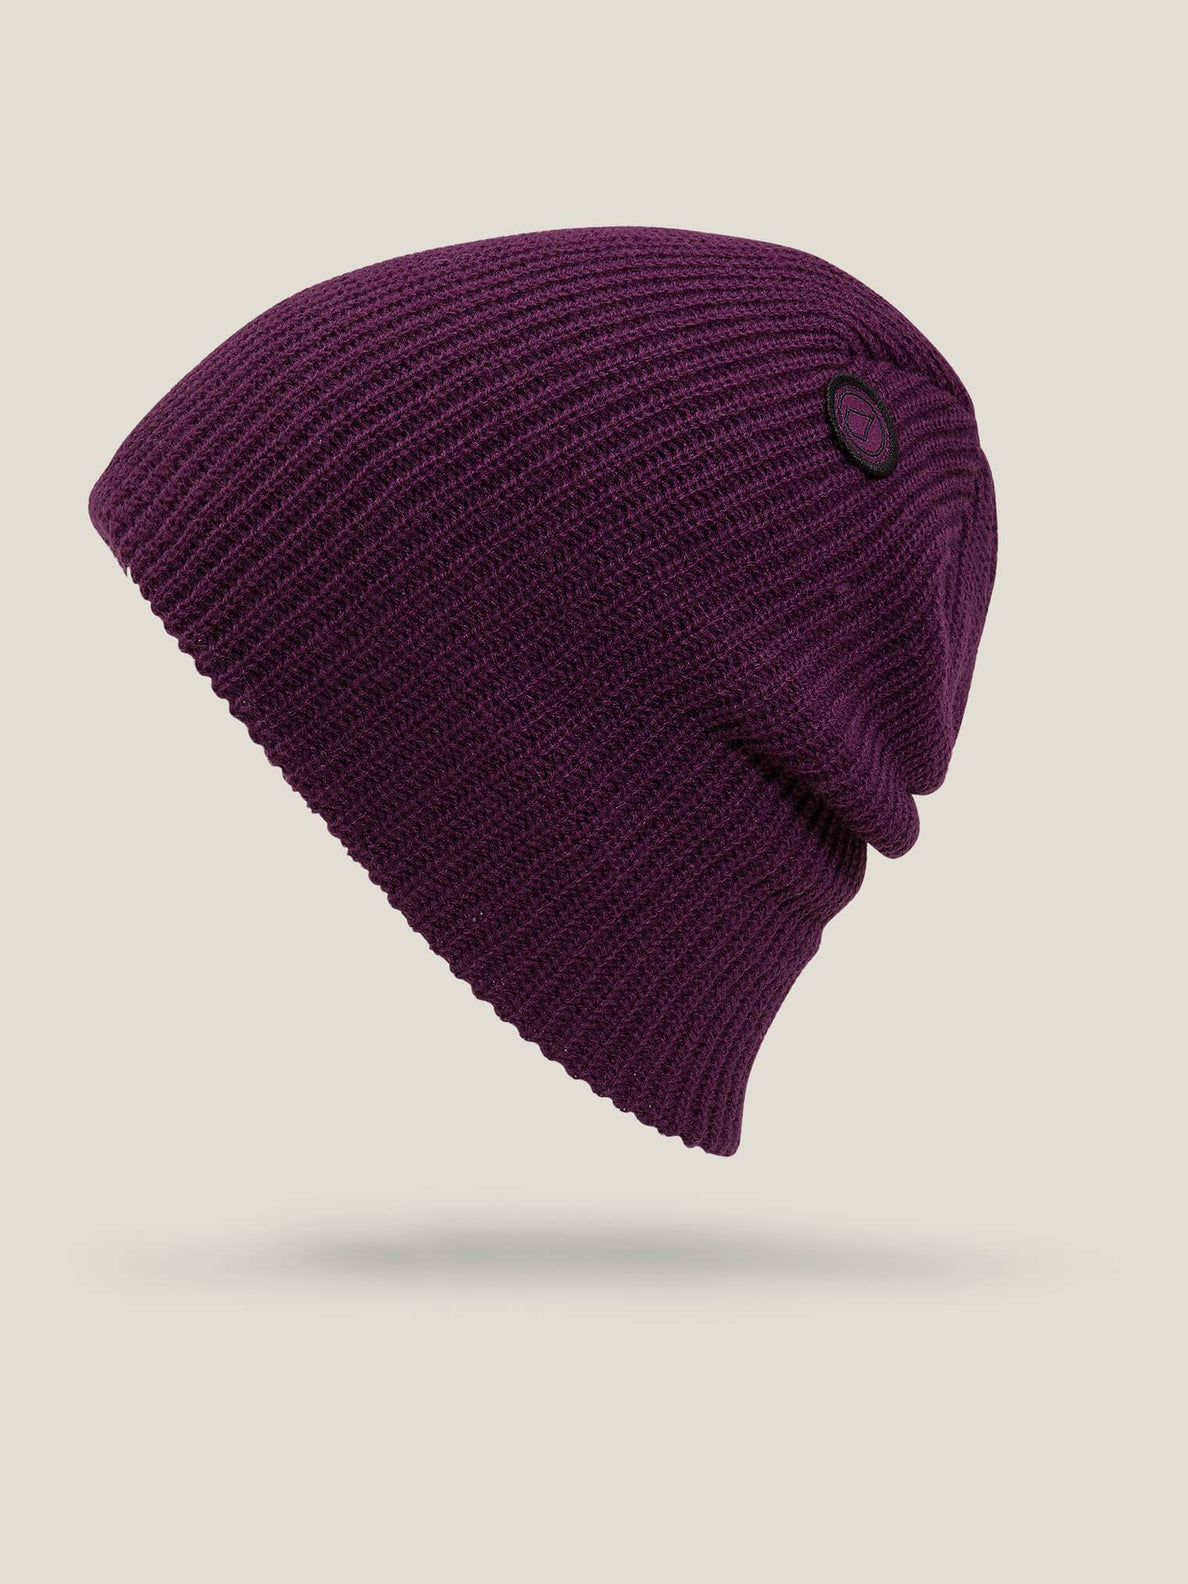 Power Beanie - Winter Orchid